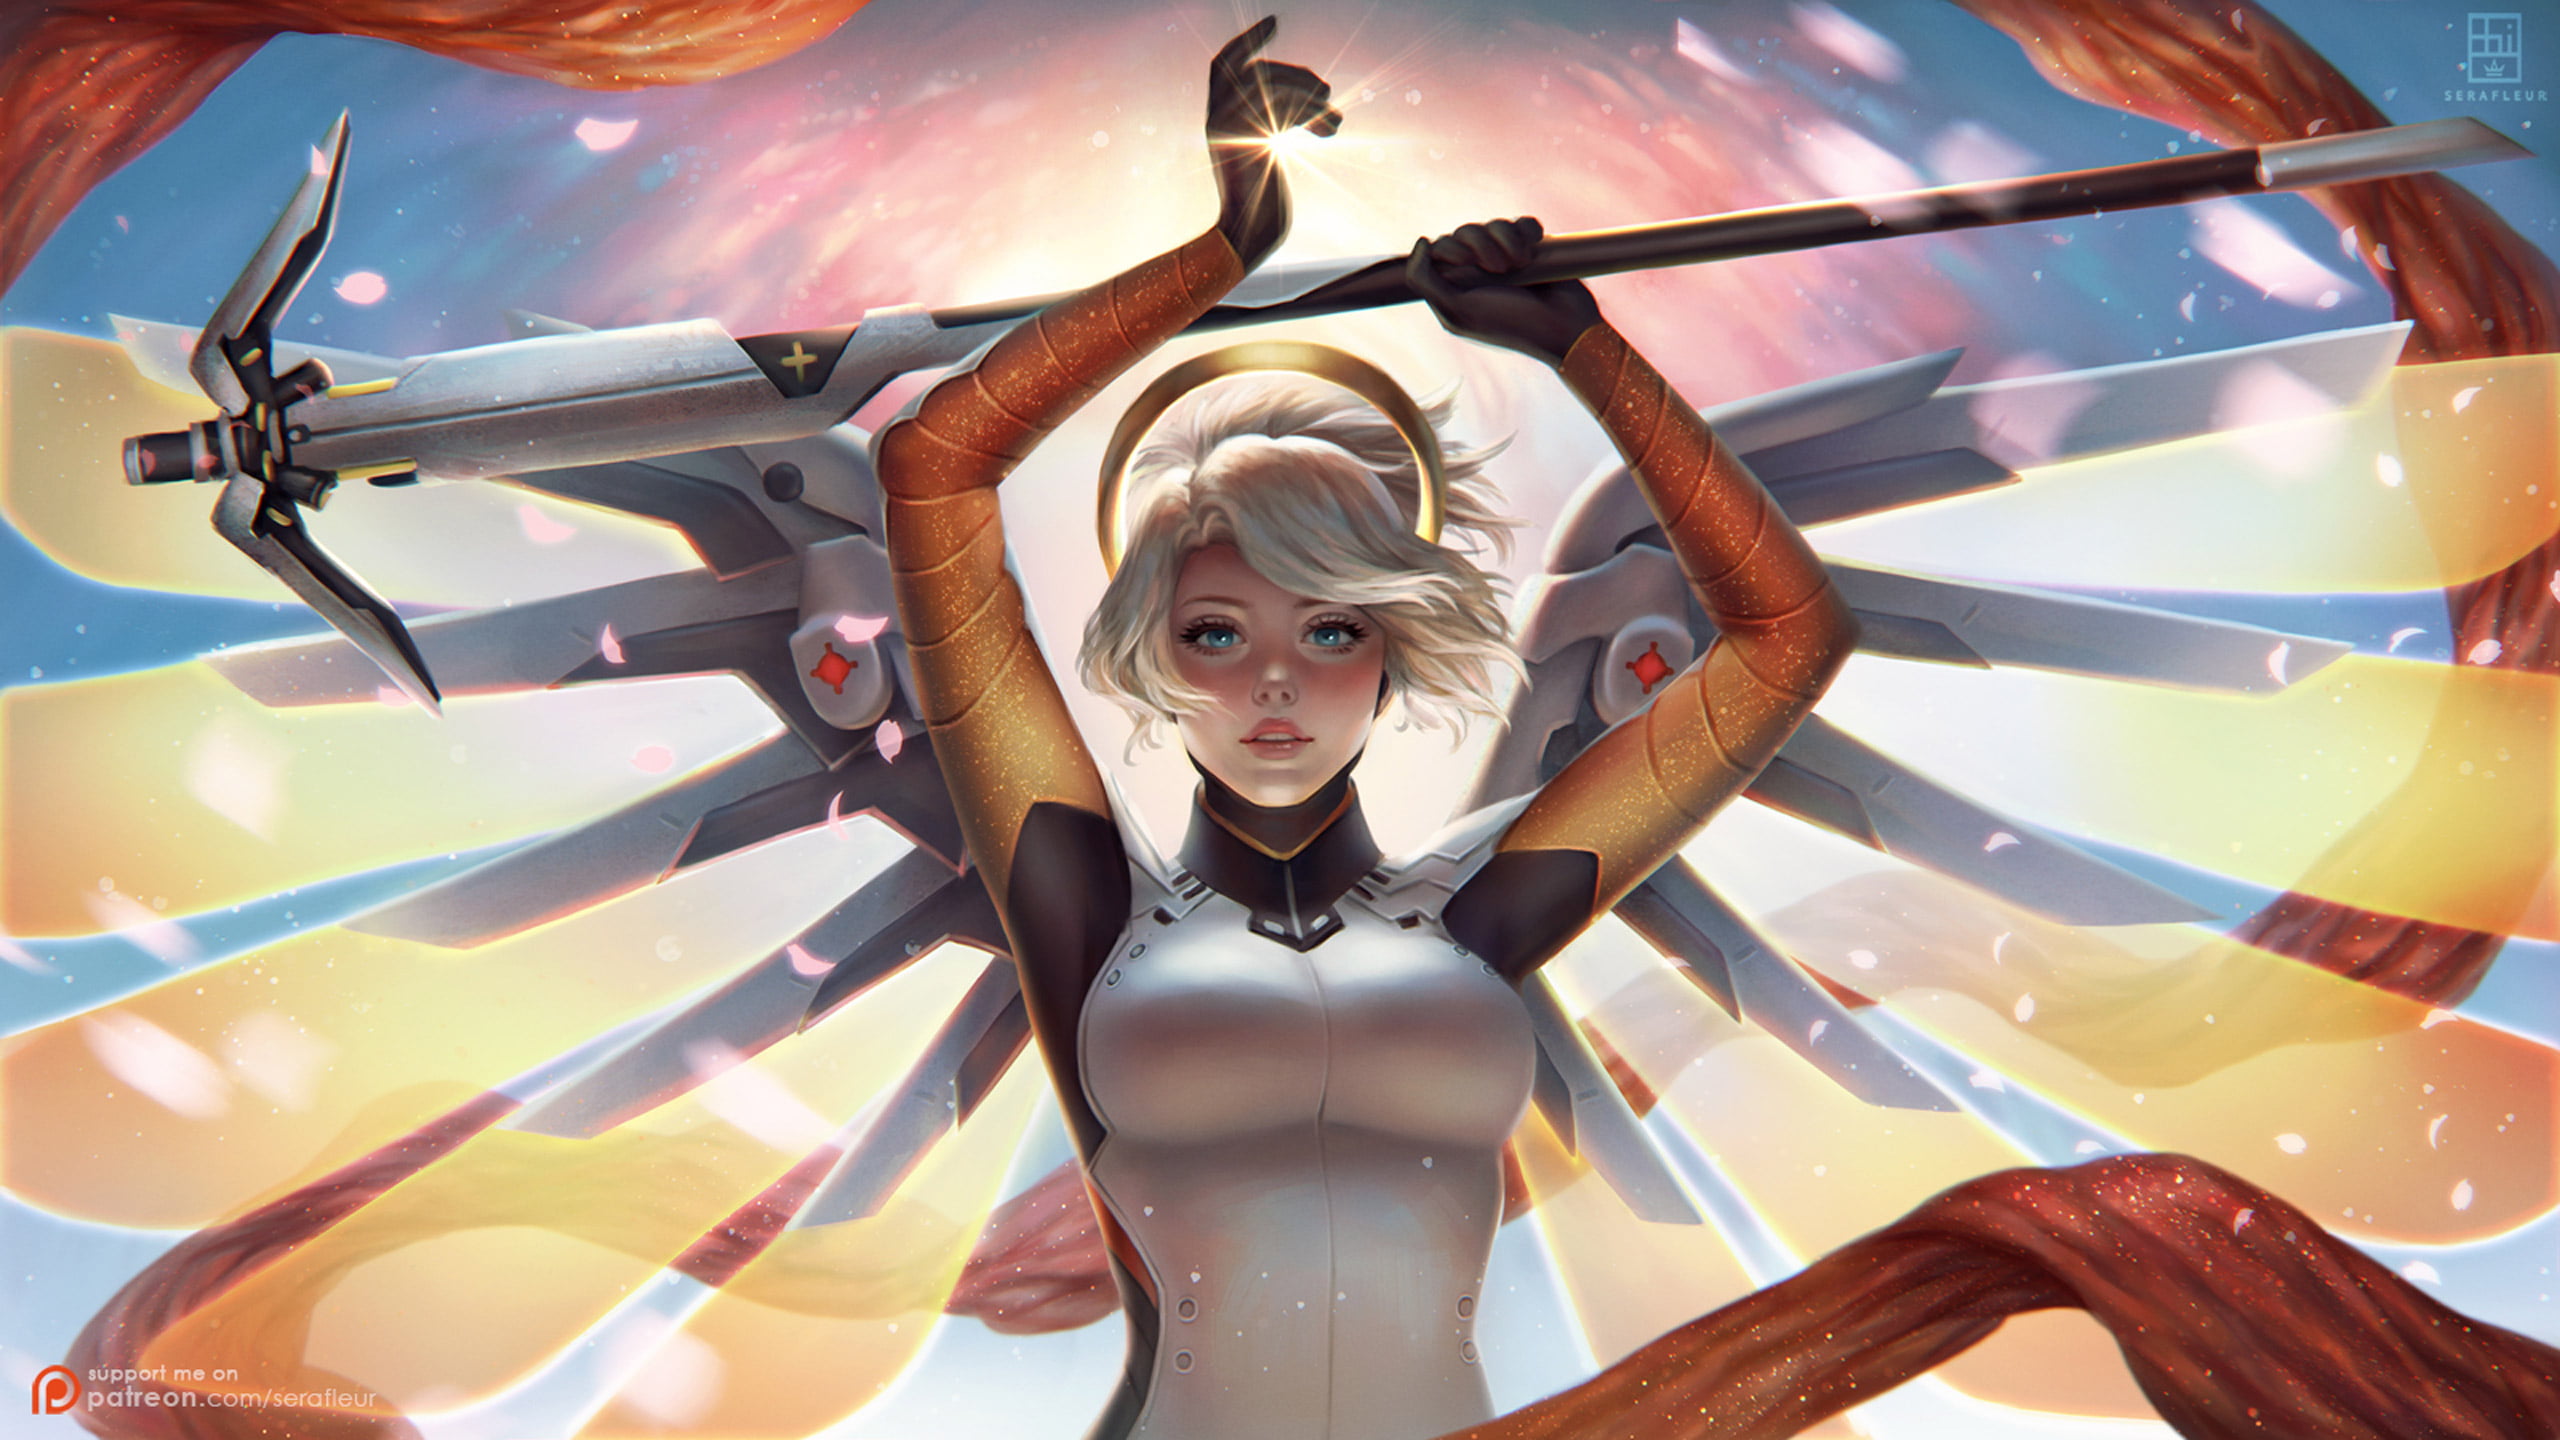 winged Overwatch character illustration